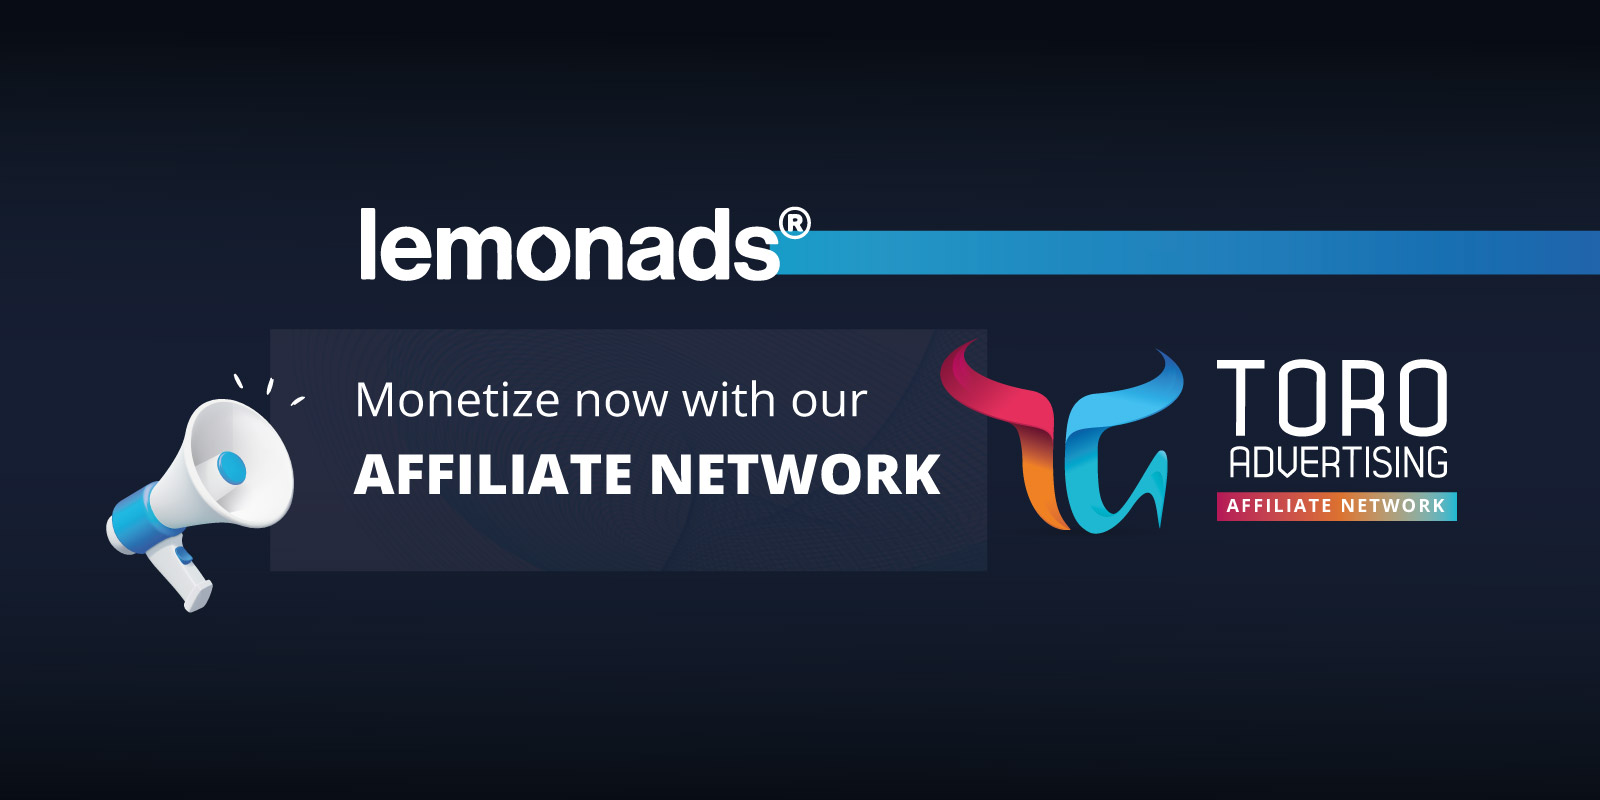 Lemonads' affiliates now can work with TORO Advertising